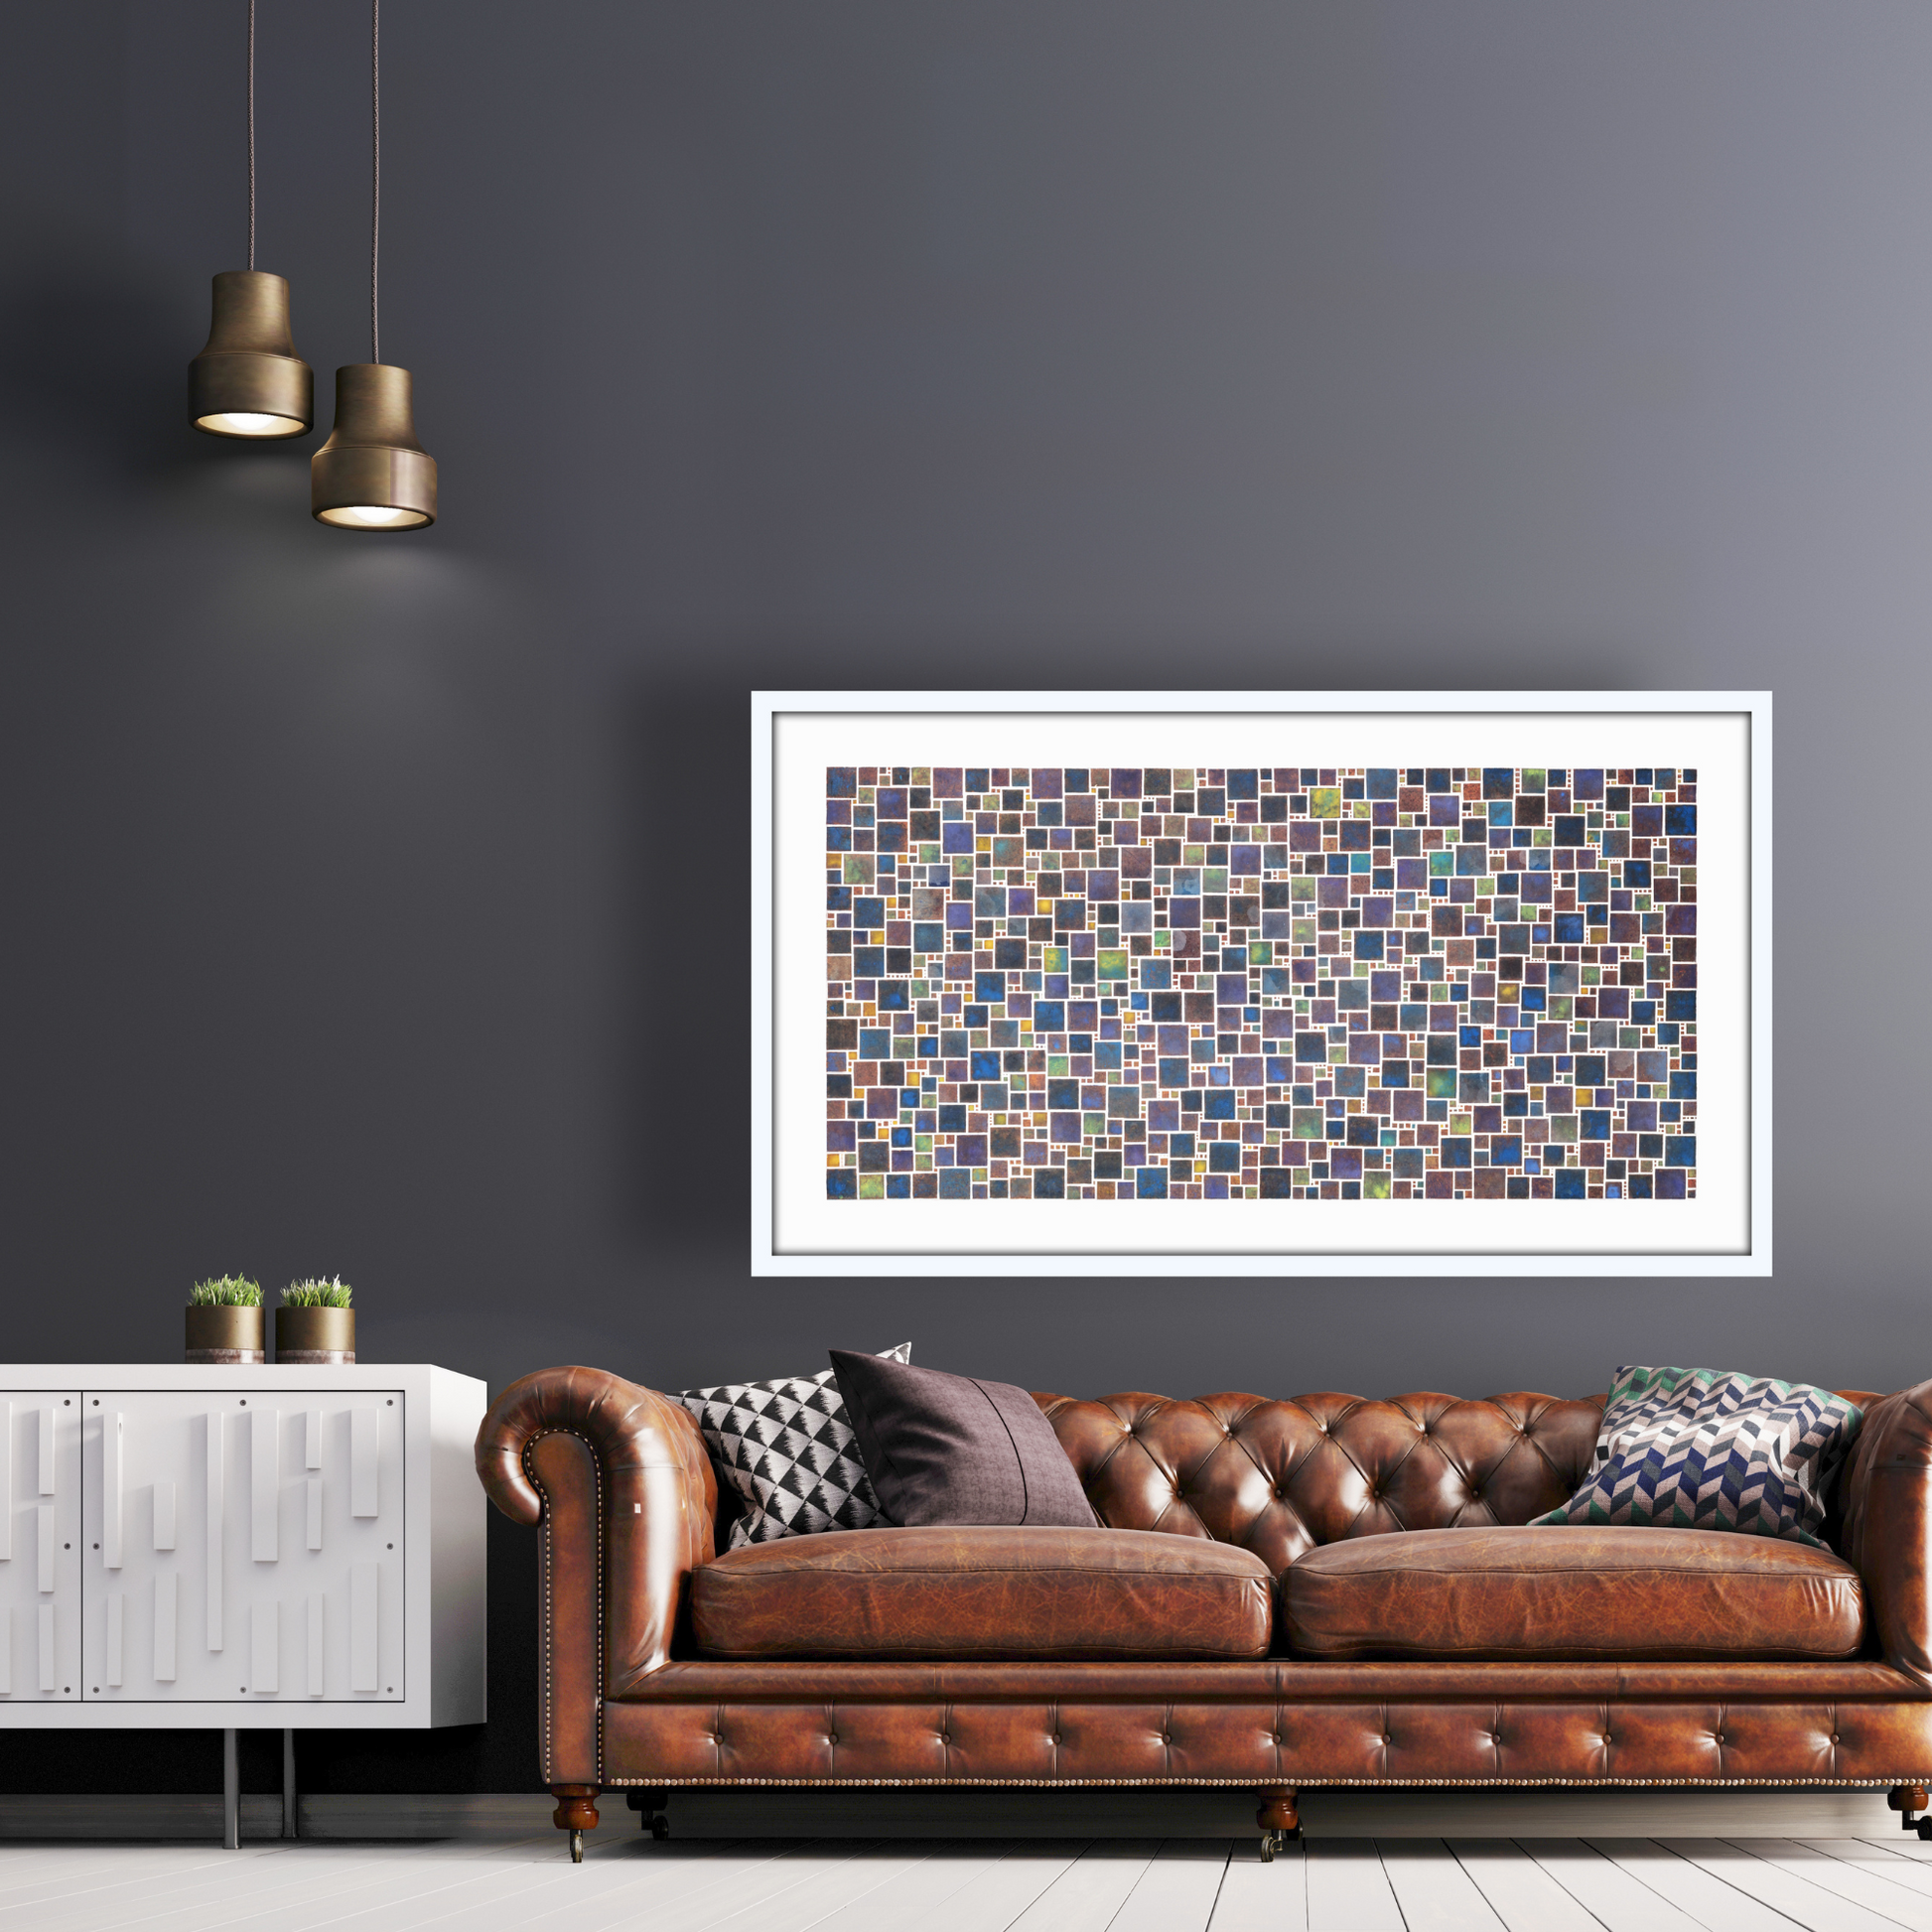 White Squares limited edition print by Seth B. Minkin